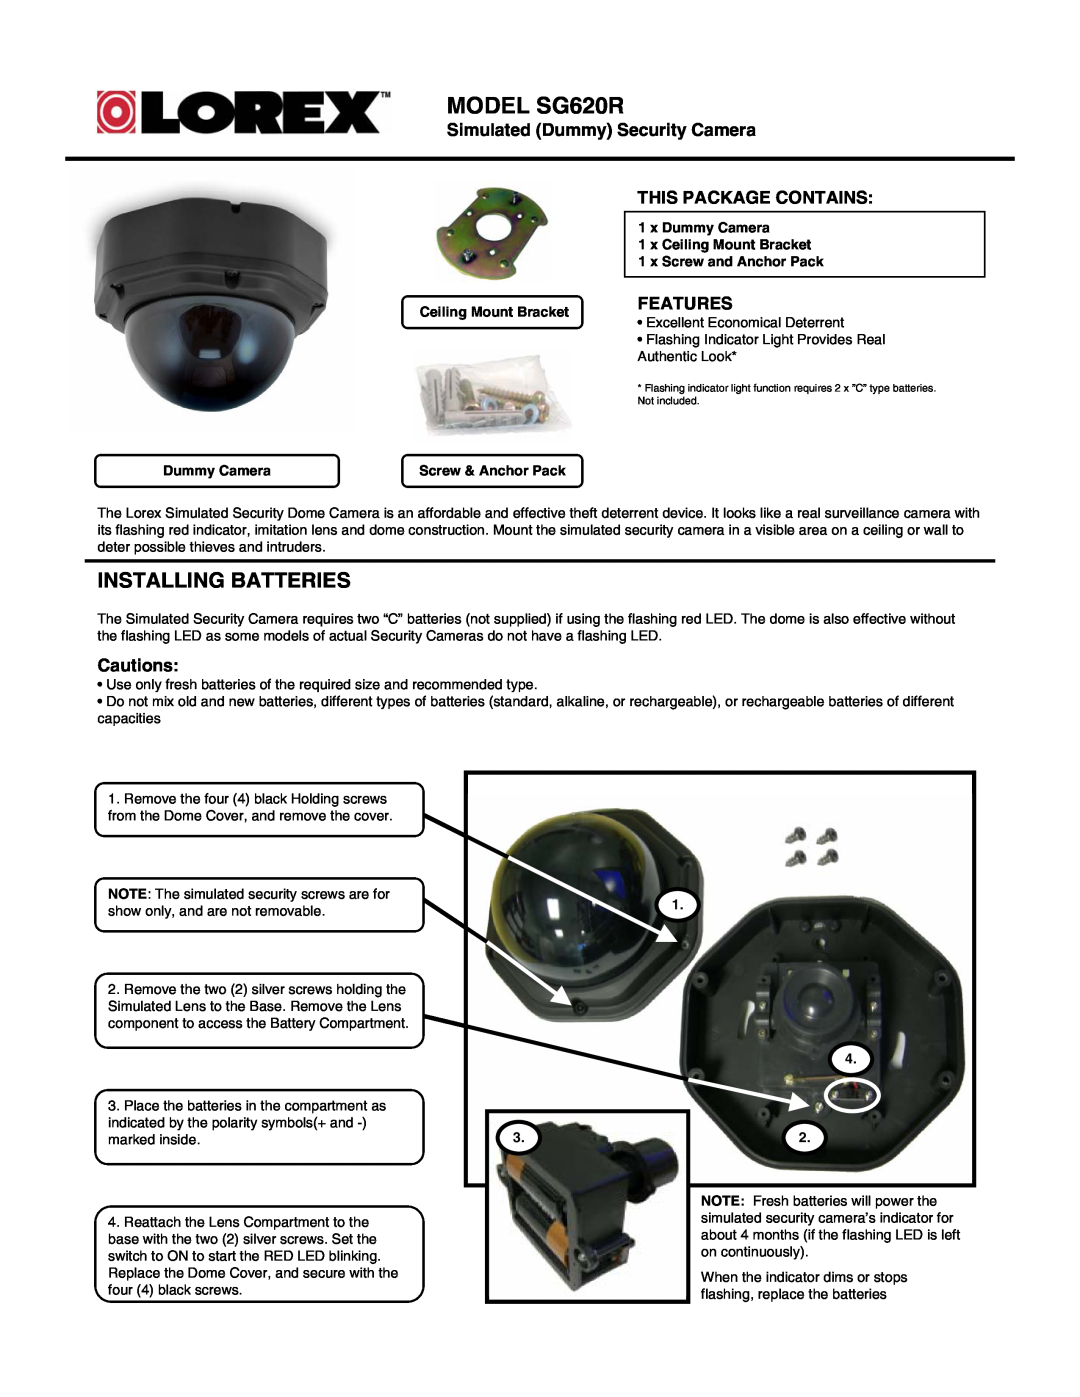 LOREX Technology SG620R manual Installing Batteries, Simulated Dummy Security Camera THIS PACKAGE CONTAINS, Features 